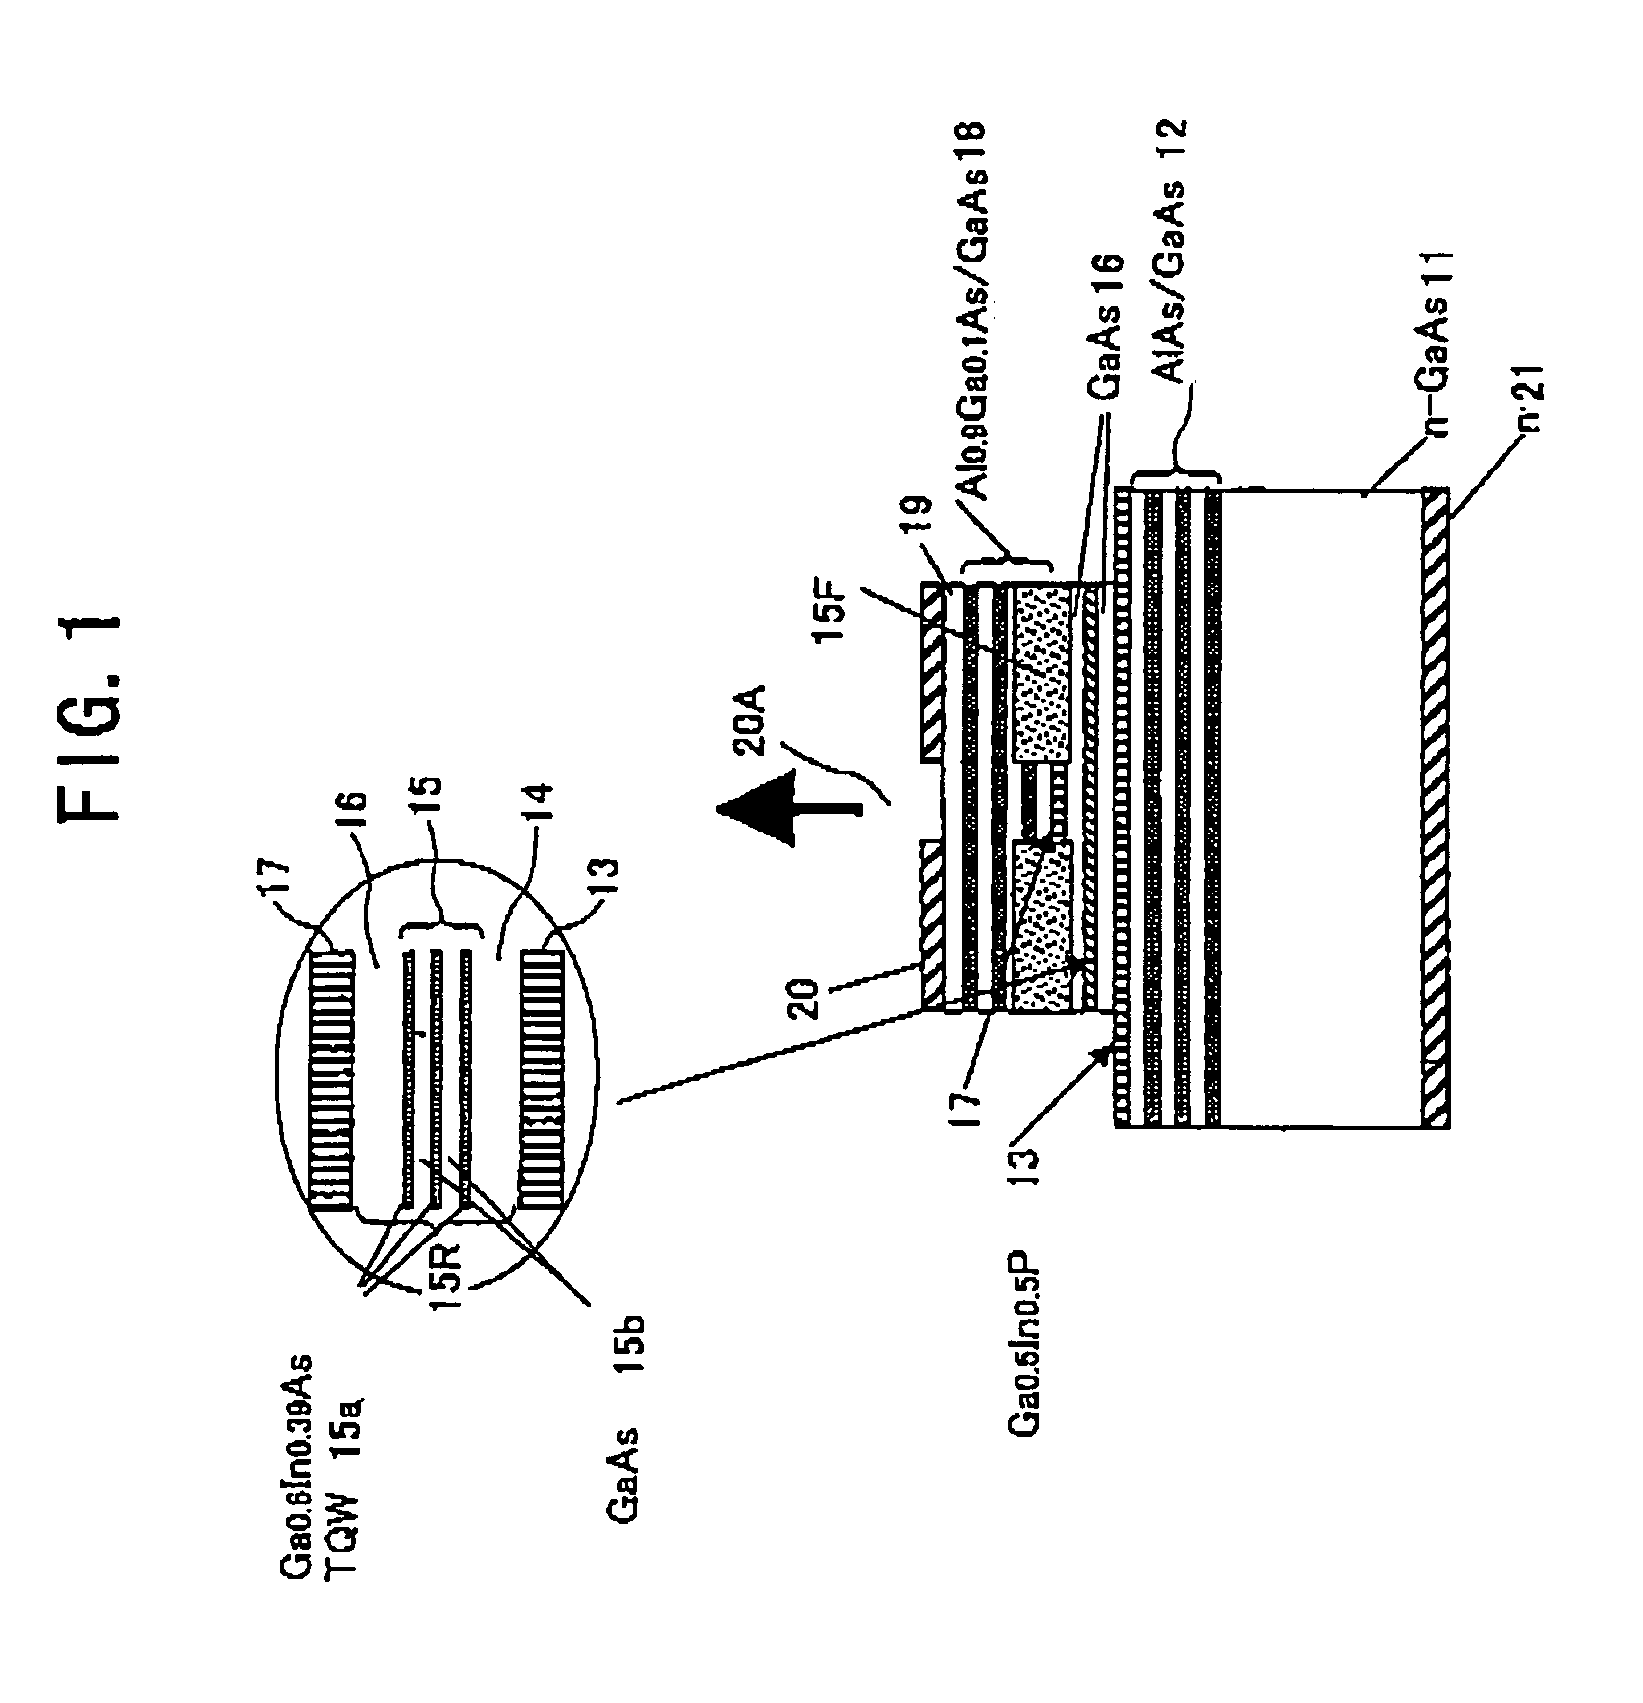 Surface-emission laser diode operable in the wavelength band of 1.1-1.7mum and optical telecommunication system using such a laser diode